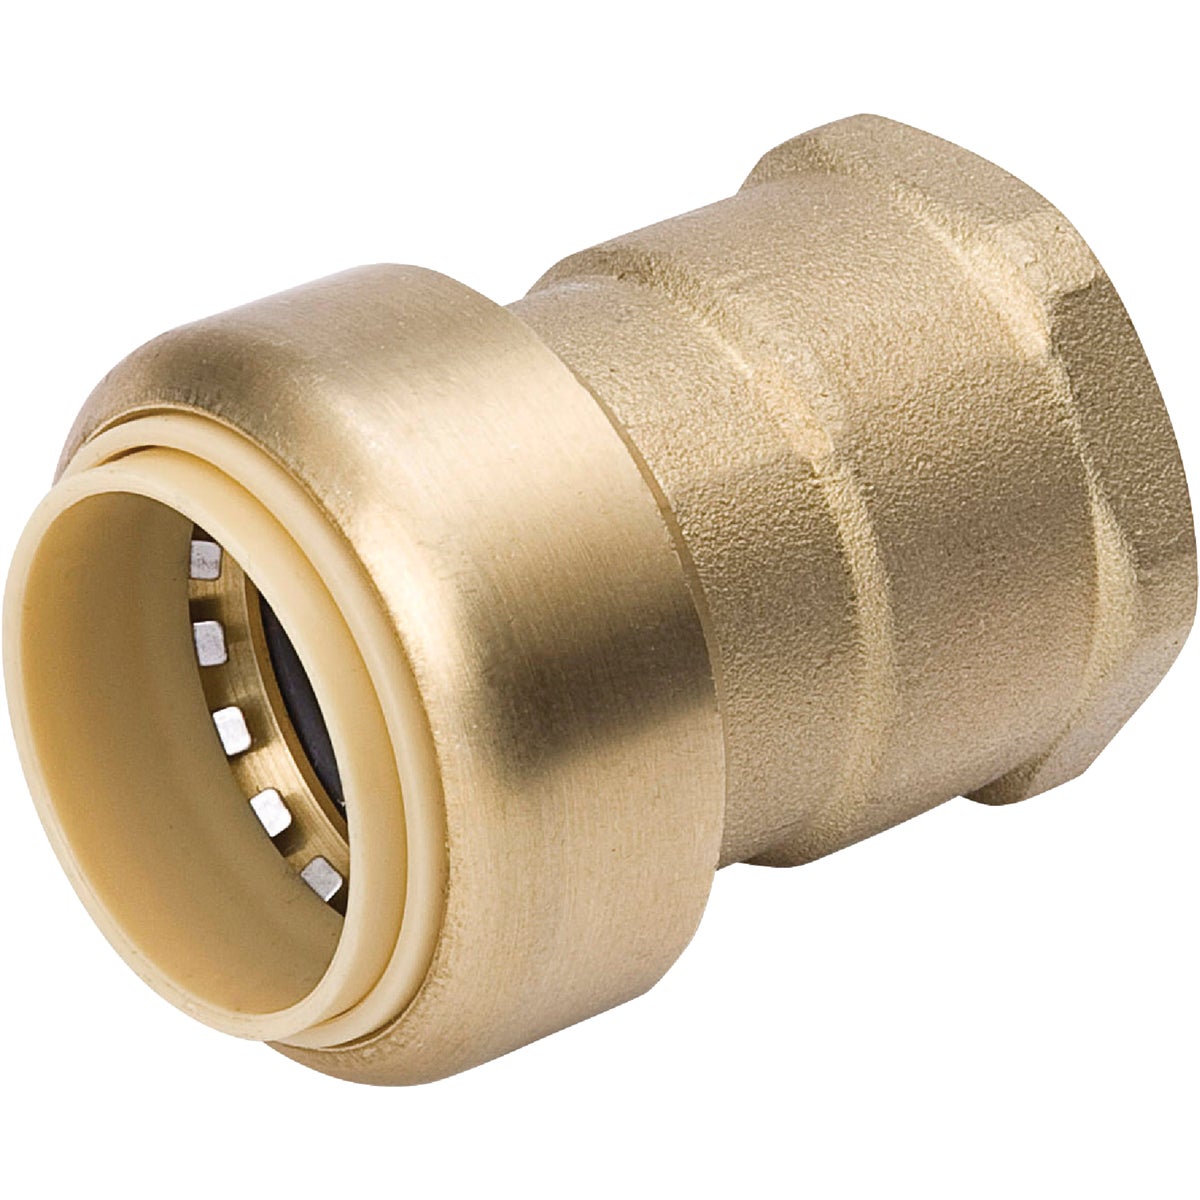 ProLine 3/4 In. x 3/4 In. FPT Brass Push Fit Adapter